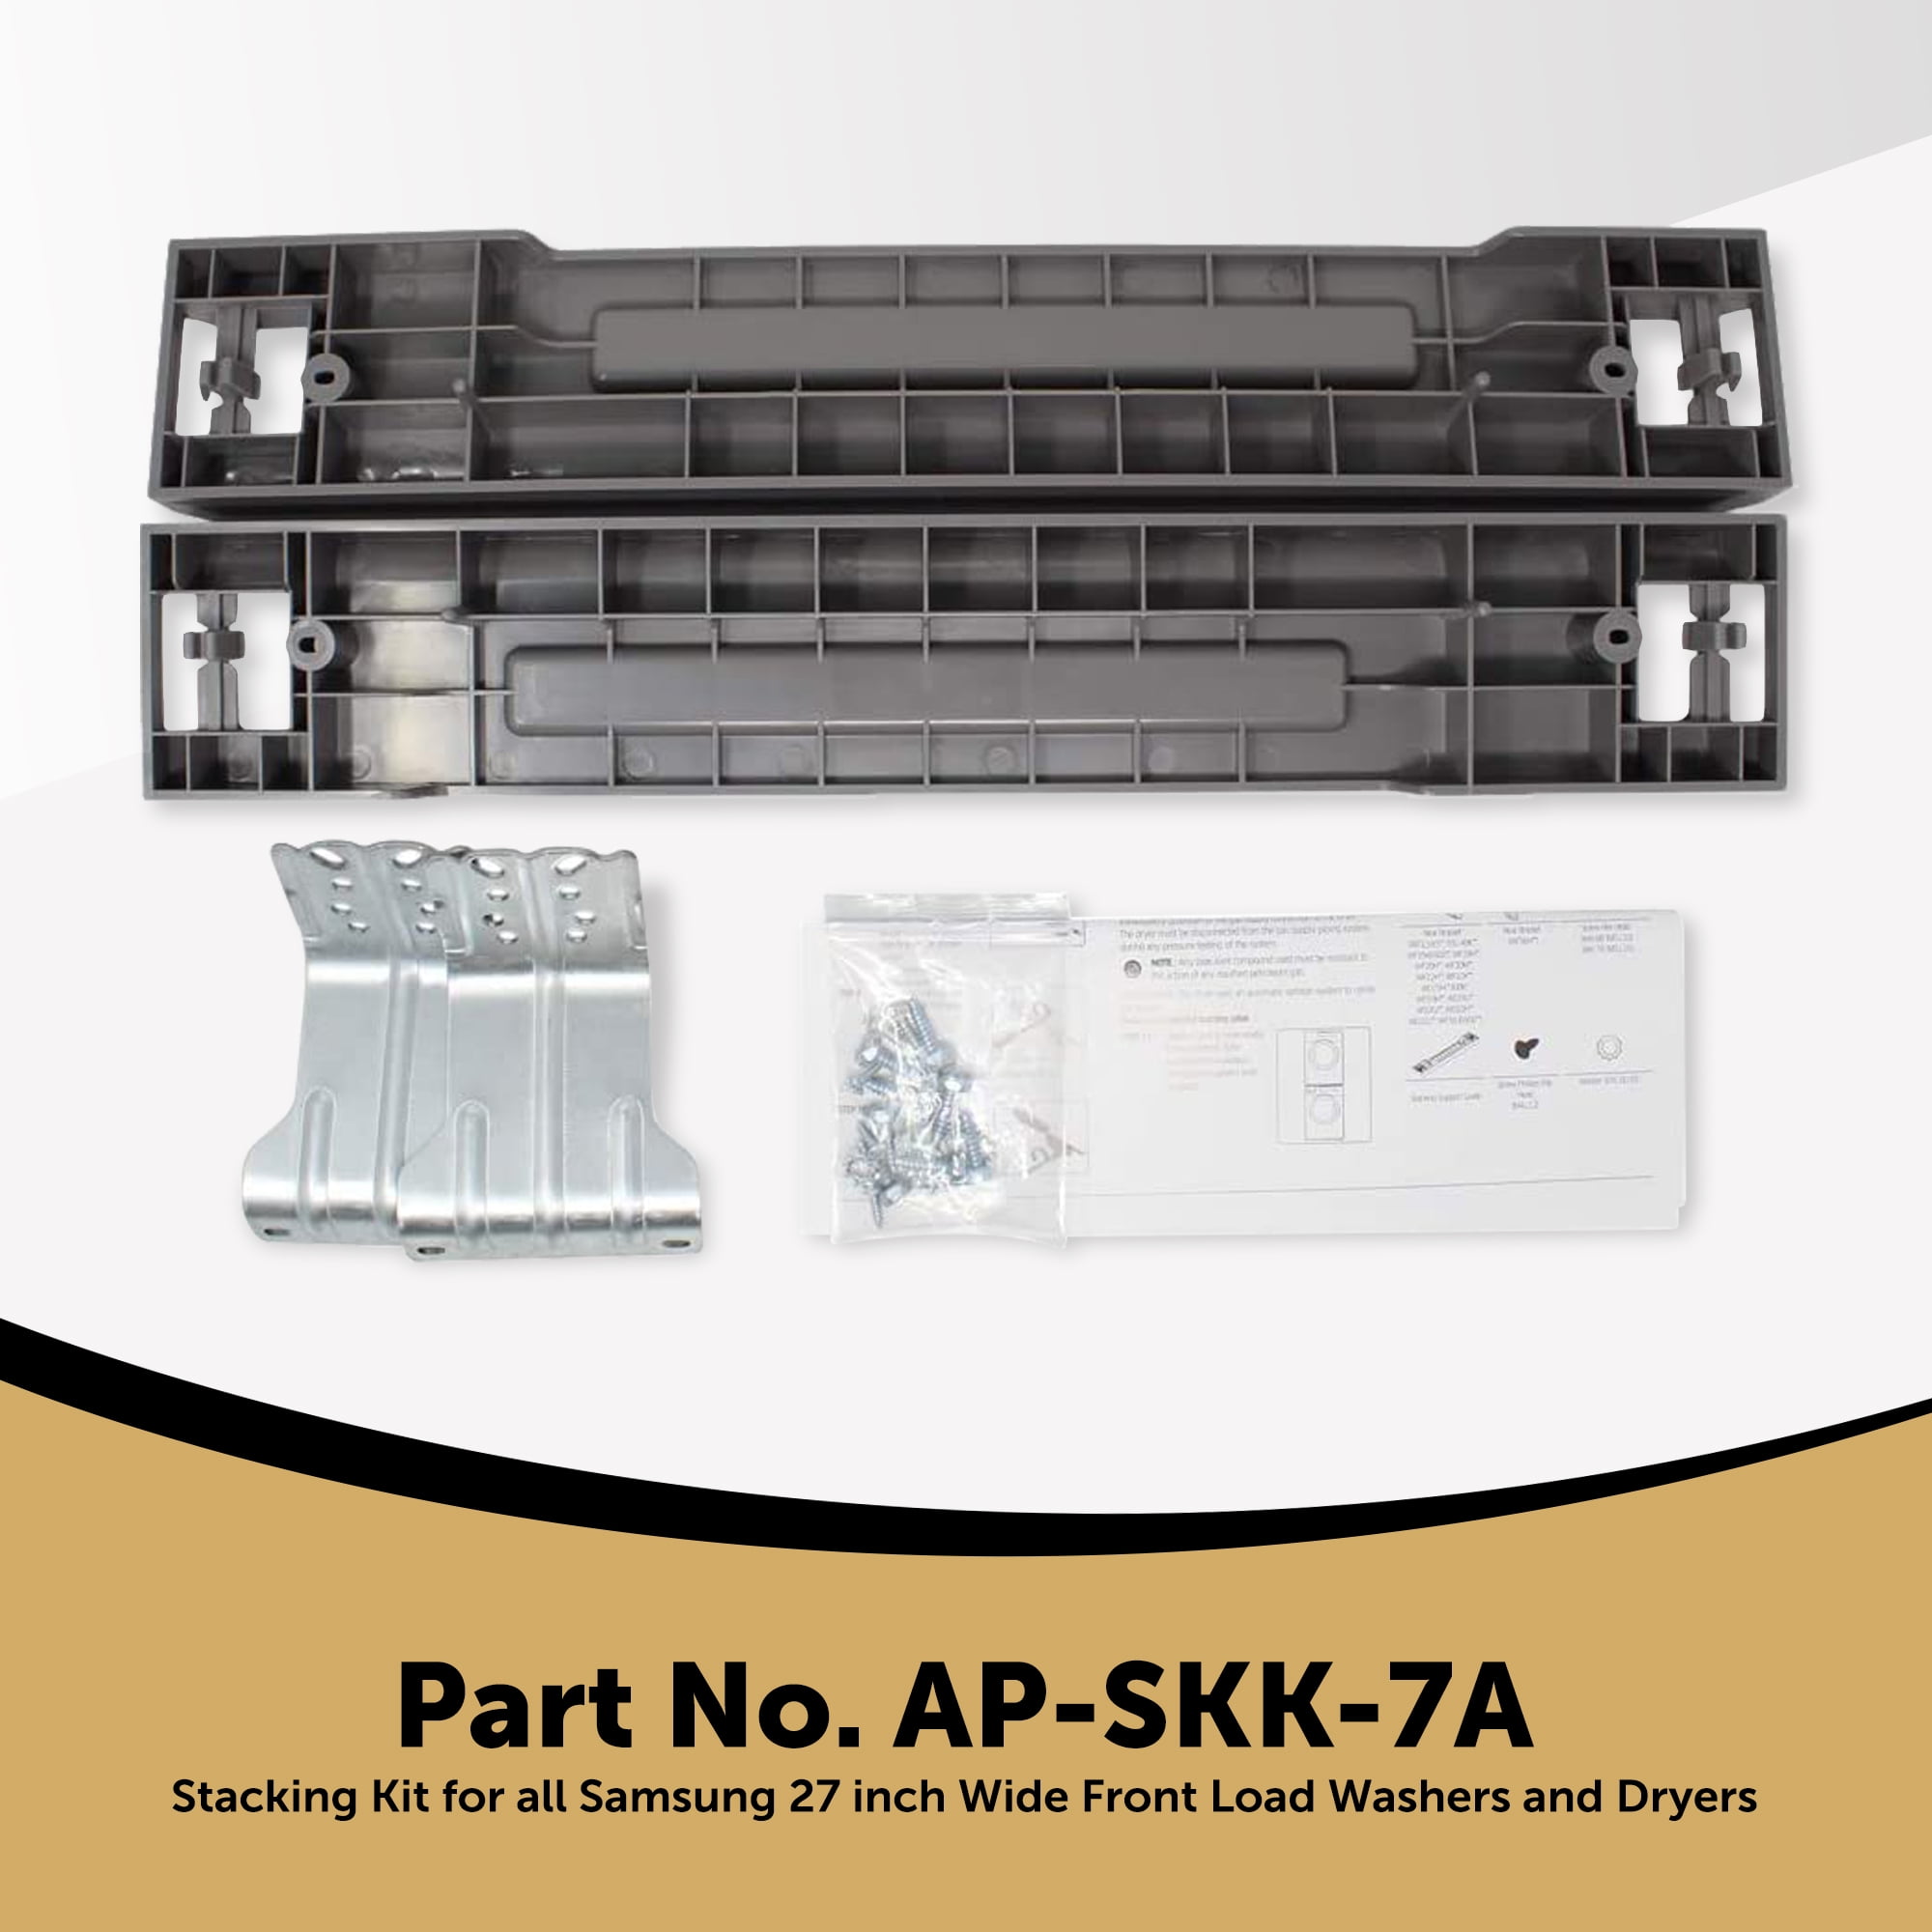 Appliance Pros Samsung Compatible Stacking Kit SKK-7A for Front Load Laundry 27" 